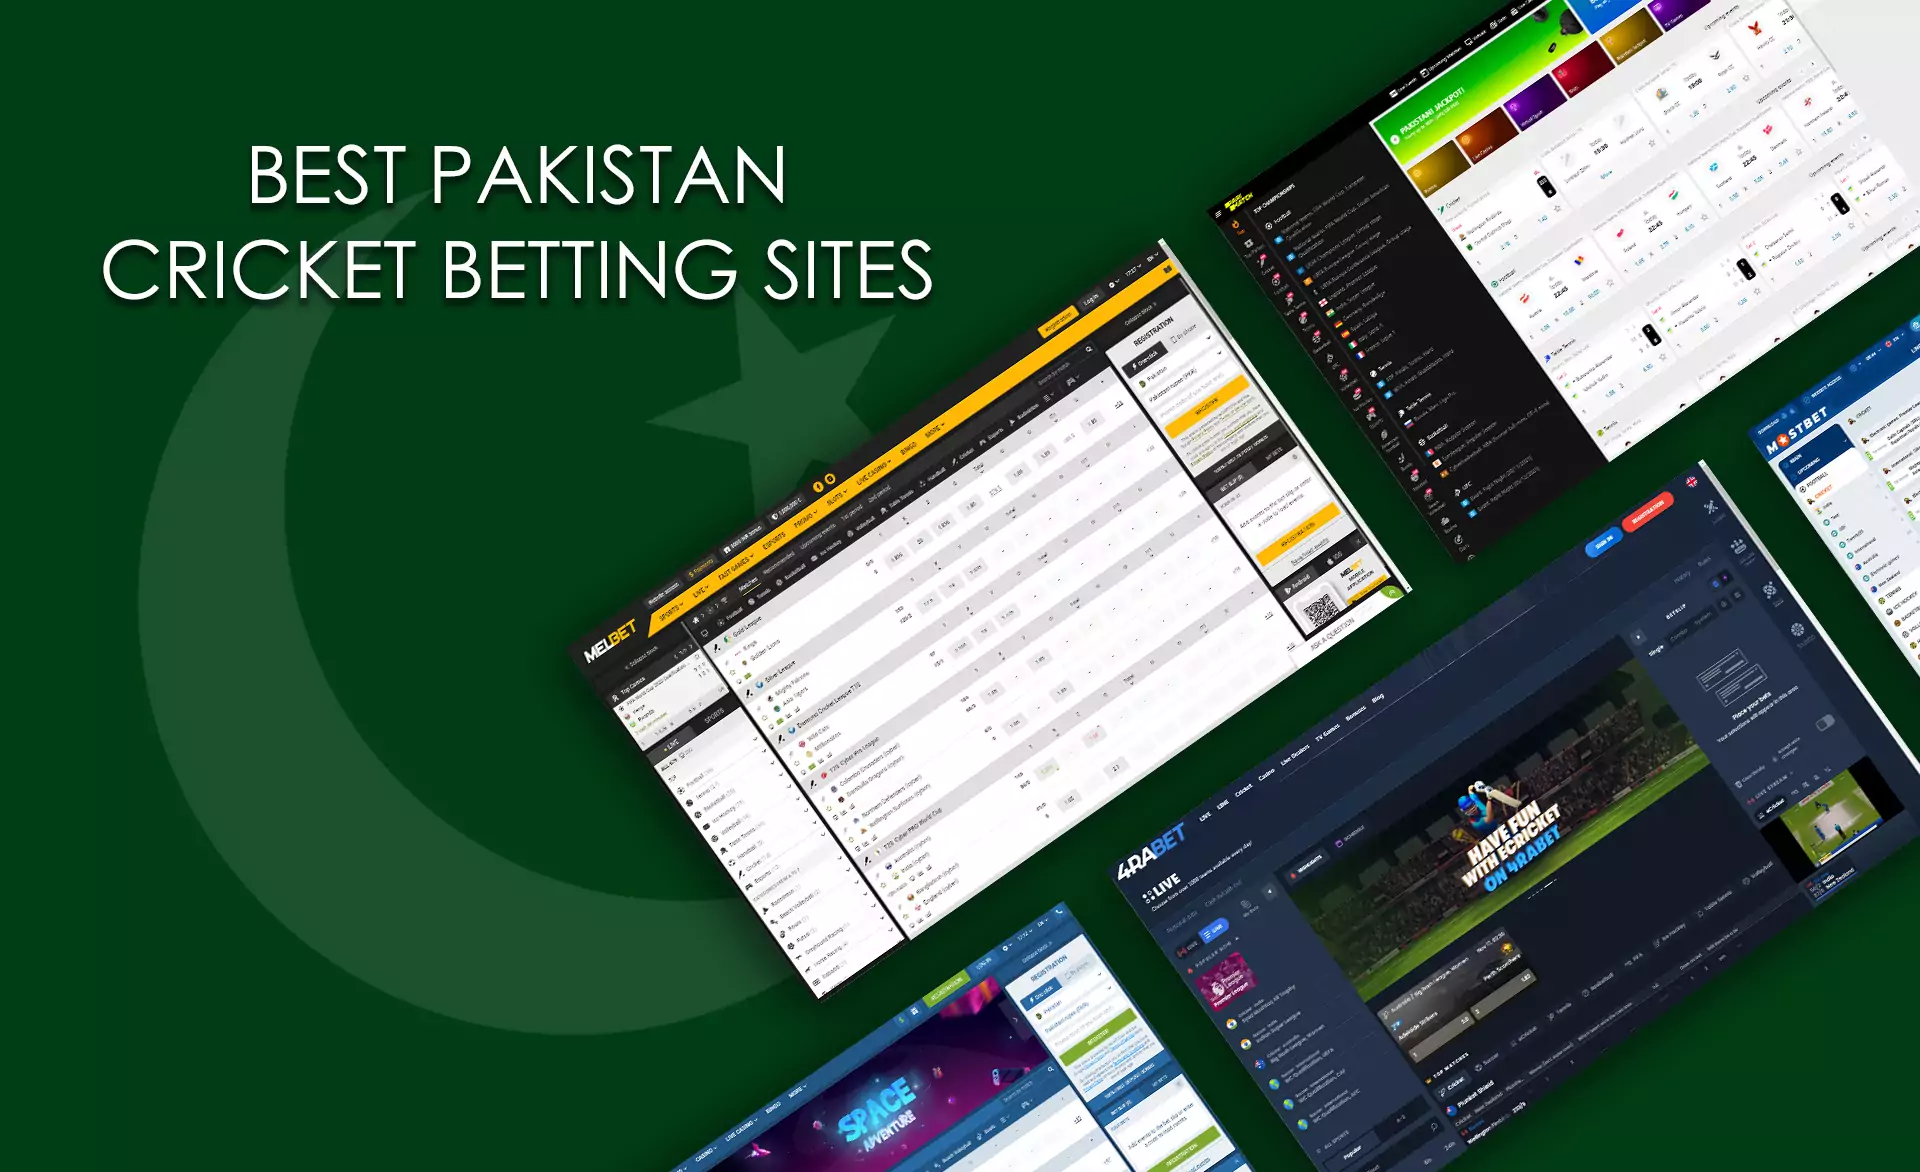 When you choose a betting site you should pay attention to the license, the list of sport disciplines, and available payment methods to deposit and withdraw.